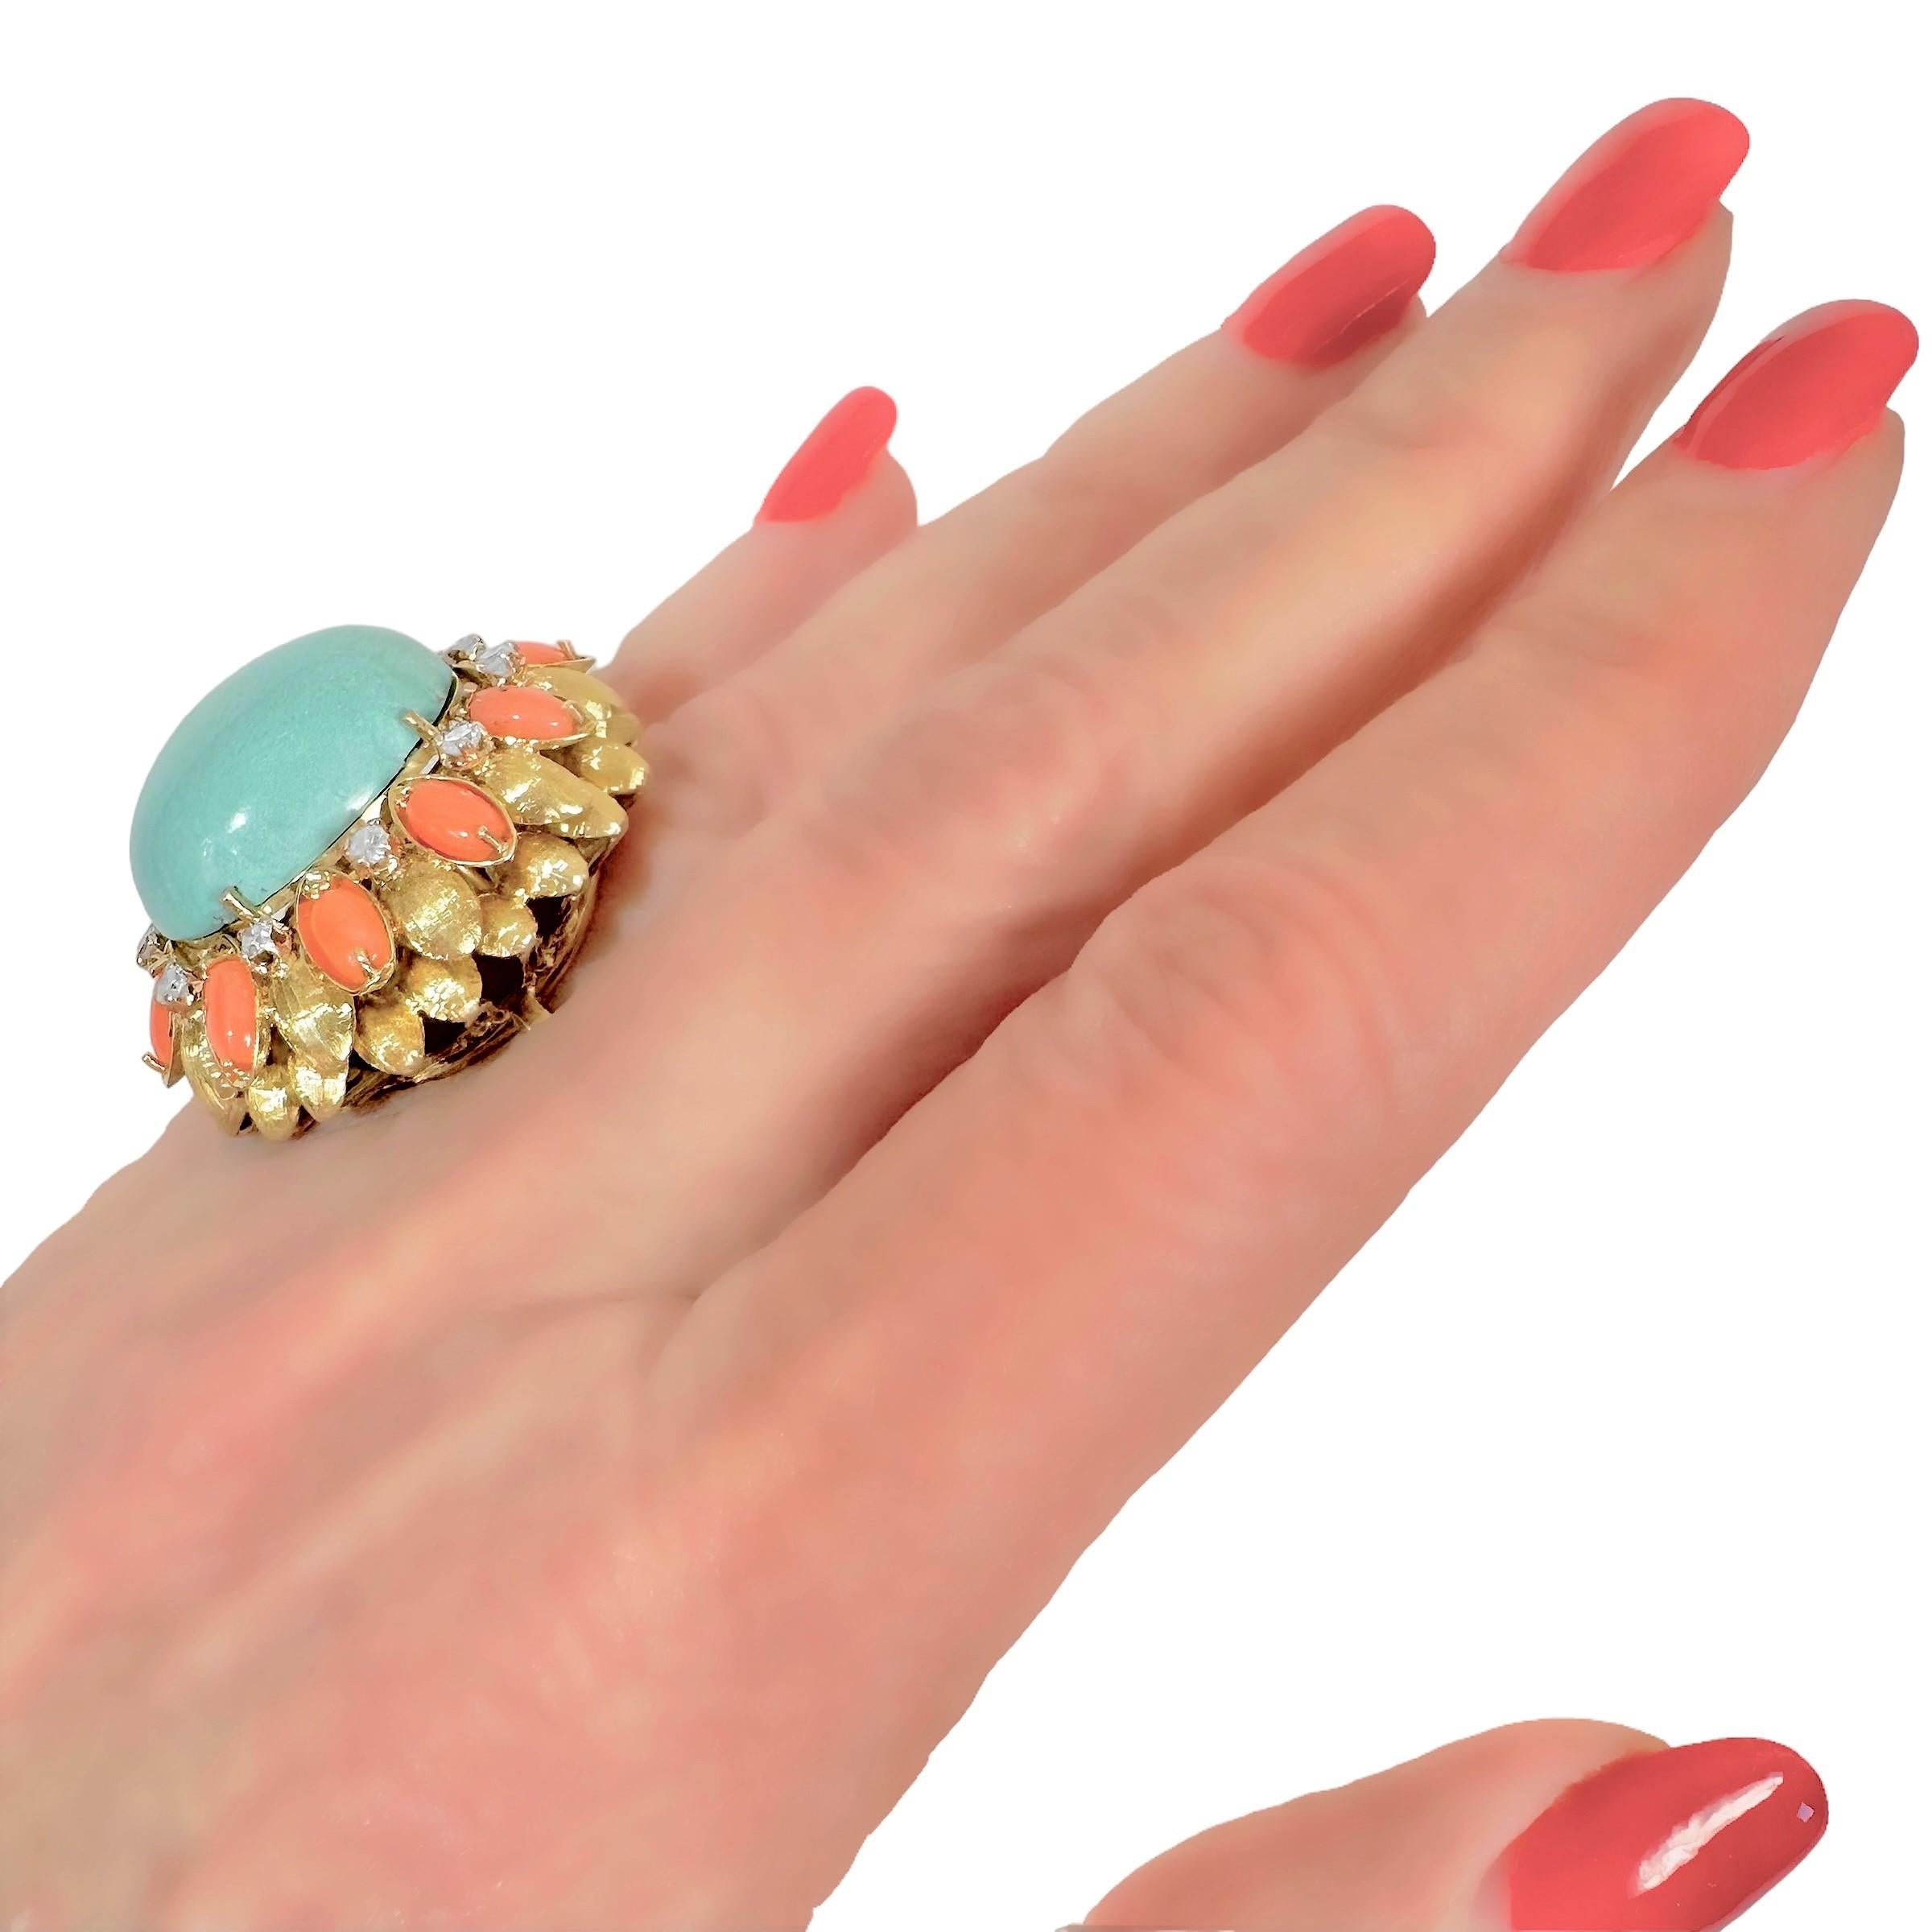 Large Scale Mid-20th Century 18K Yellow Gold, Coral, Turquoise and Diamond Ring For Sale 5